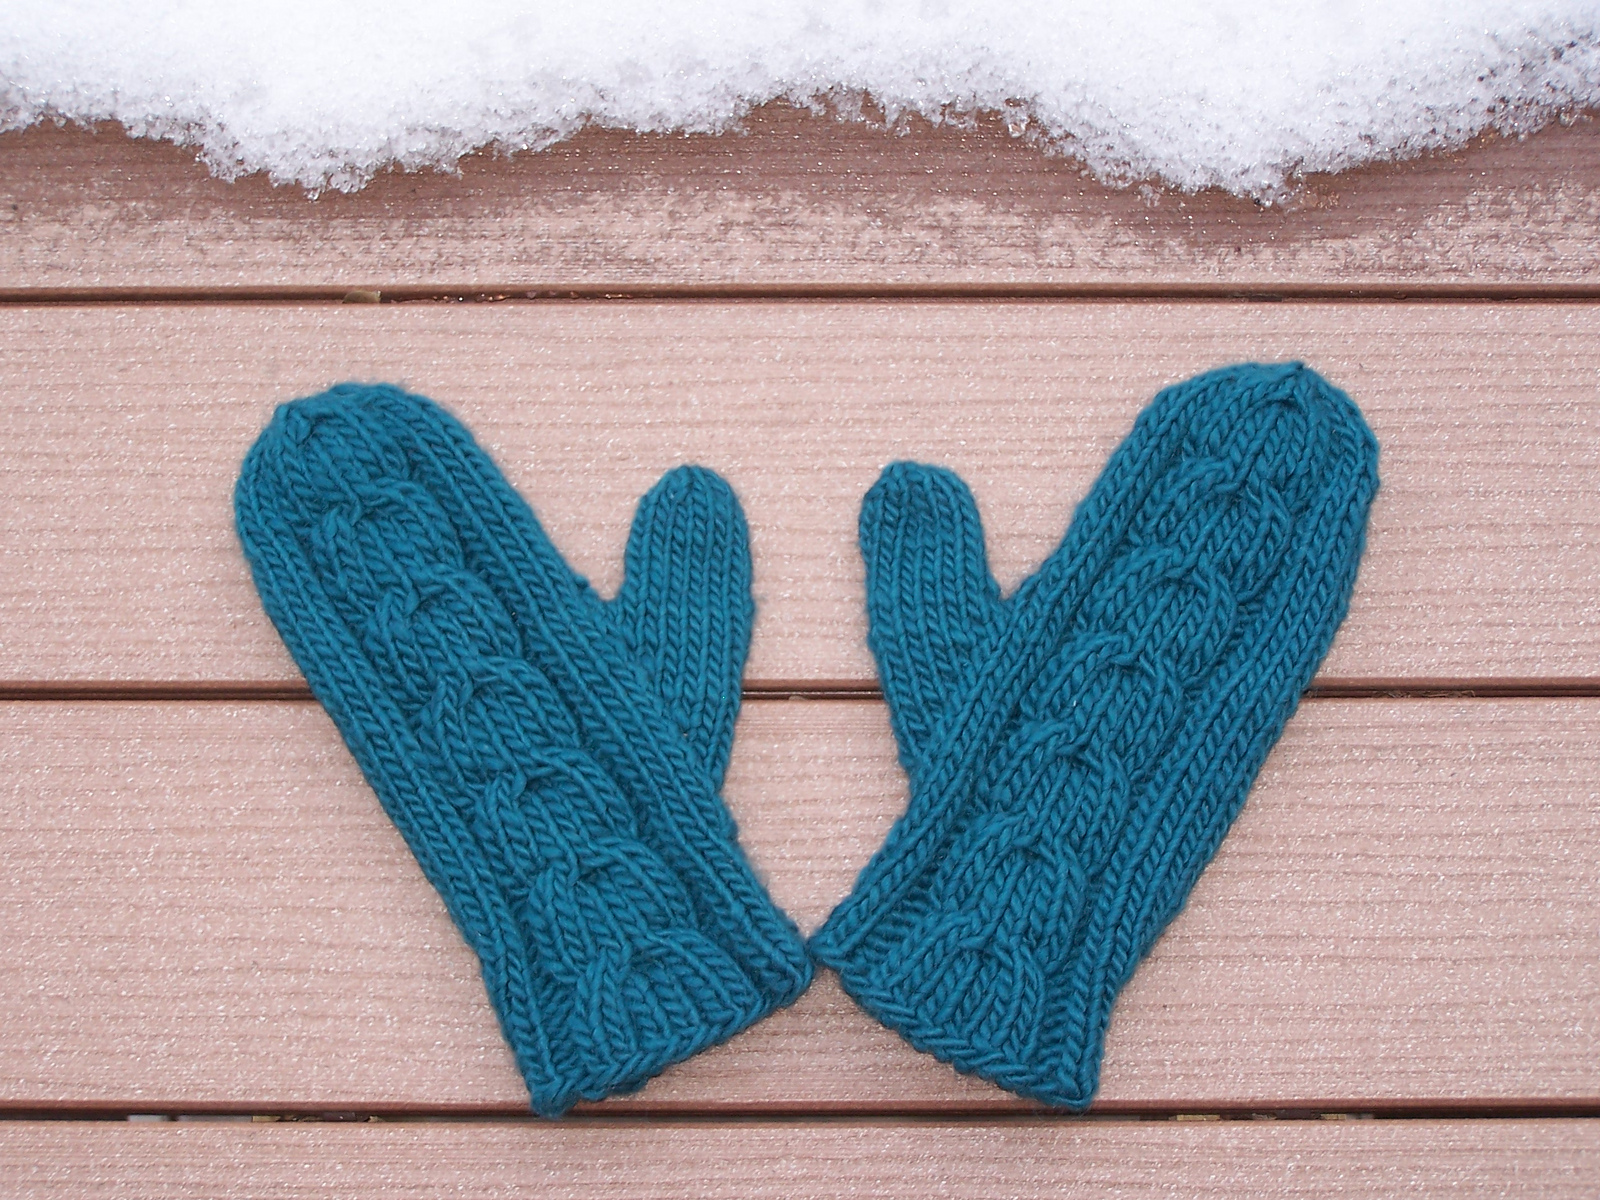 blue cabled mittens lying on a flat wood surface with winter snow